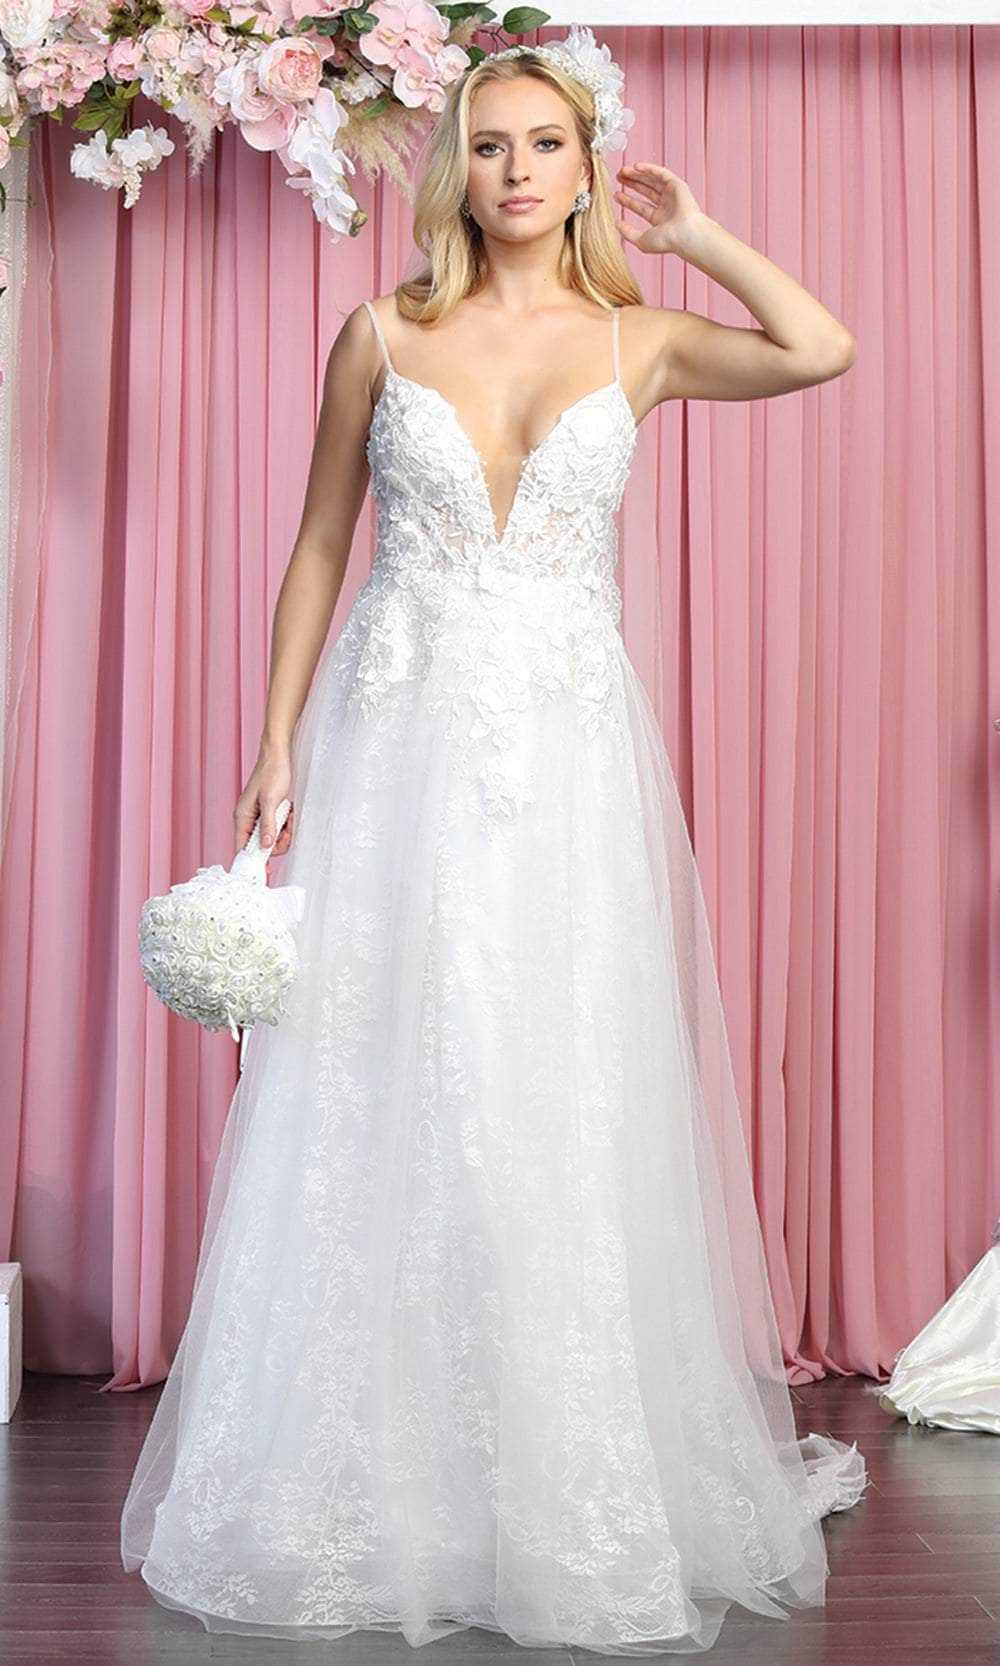 May Queen, May Queen RQ7915 - Sleeveless Deep V-neck Bridal Gown